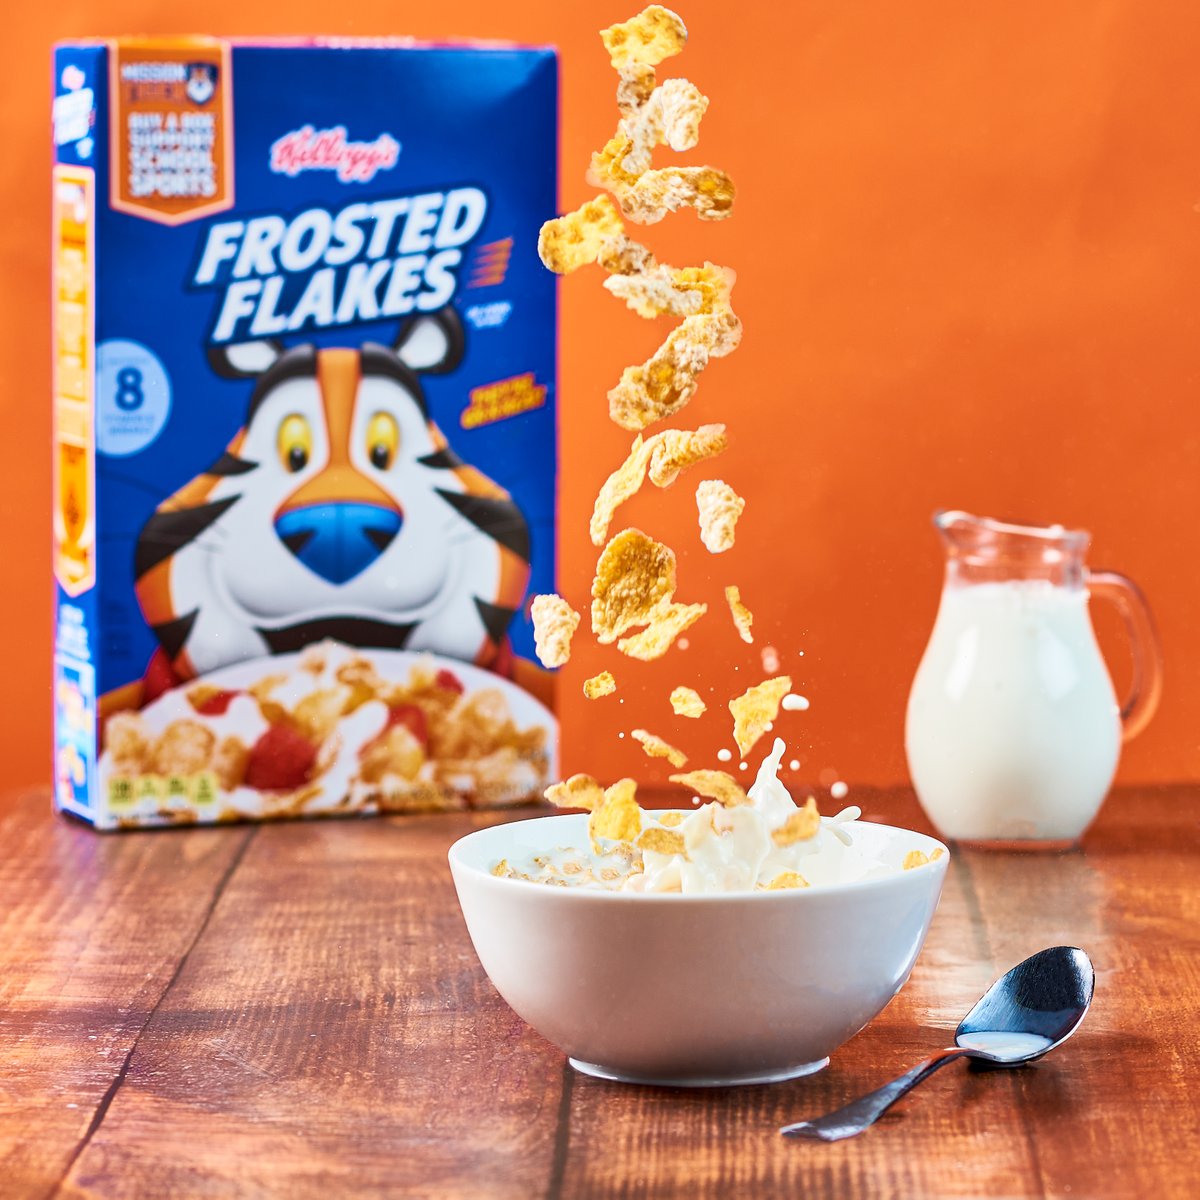 I wanted some Frosted Flakes, so I made myself a cereal bowl of Frosted Flakes